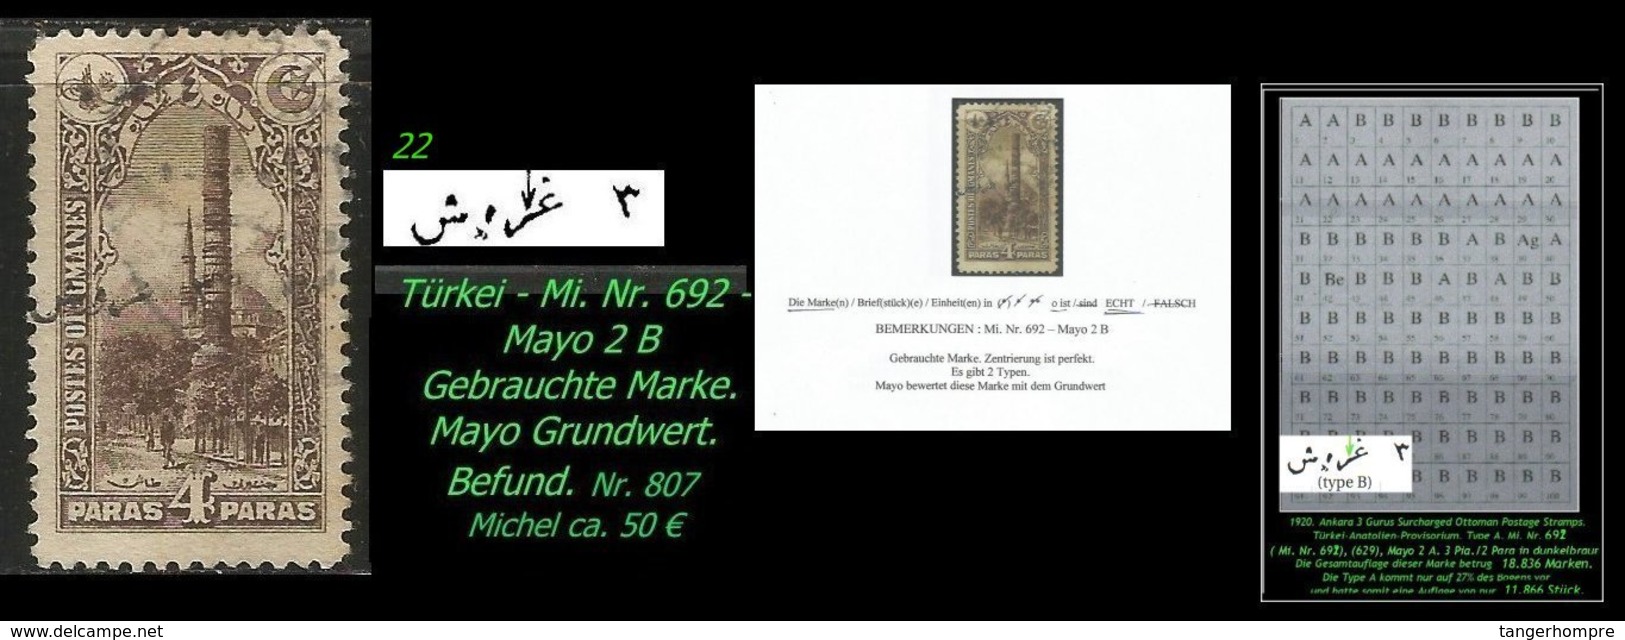 EARLY OTTOMAN SPECIALIZED FOR SPECIALIST, SEE...Mi. Nr. 692 - Mayo Nr. 2 B - 1920-21 Anatolie